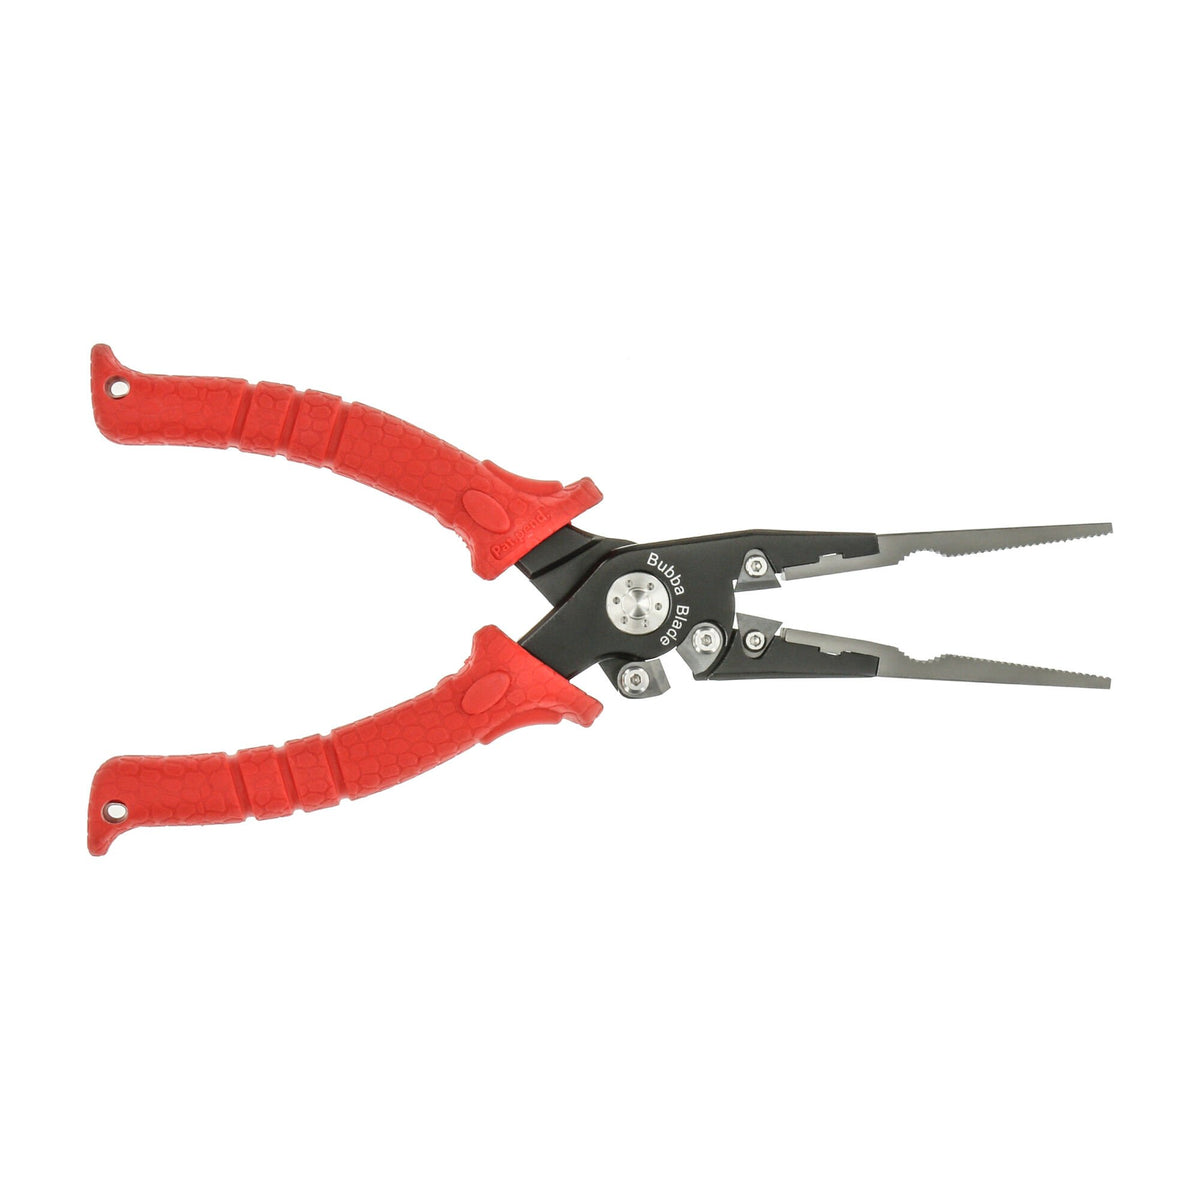 Bubba Blade 8.5 Inch Pistol Grip Long Nose Fishing Pliers with Non